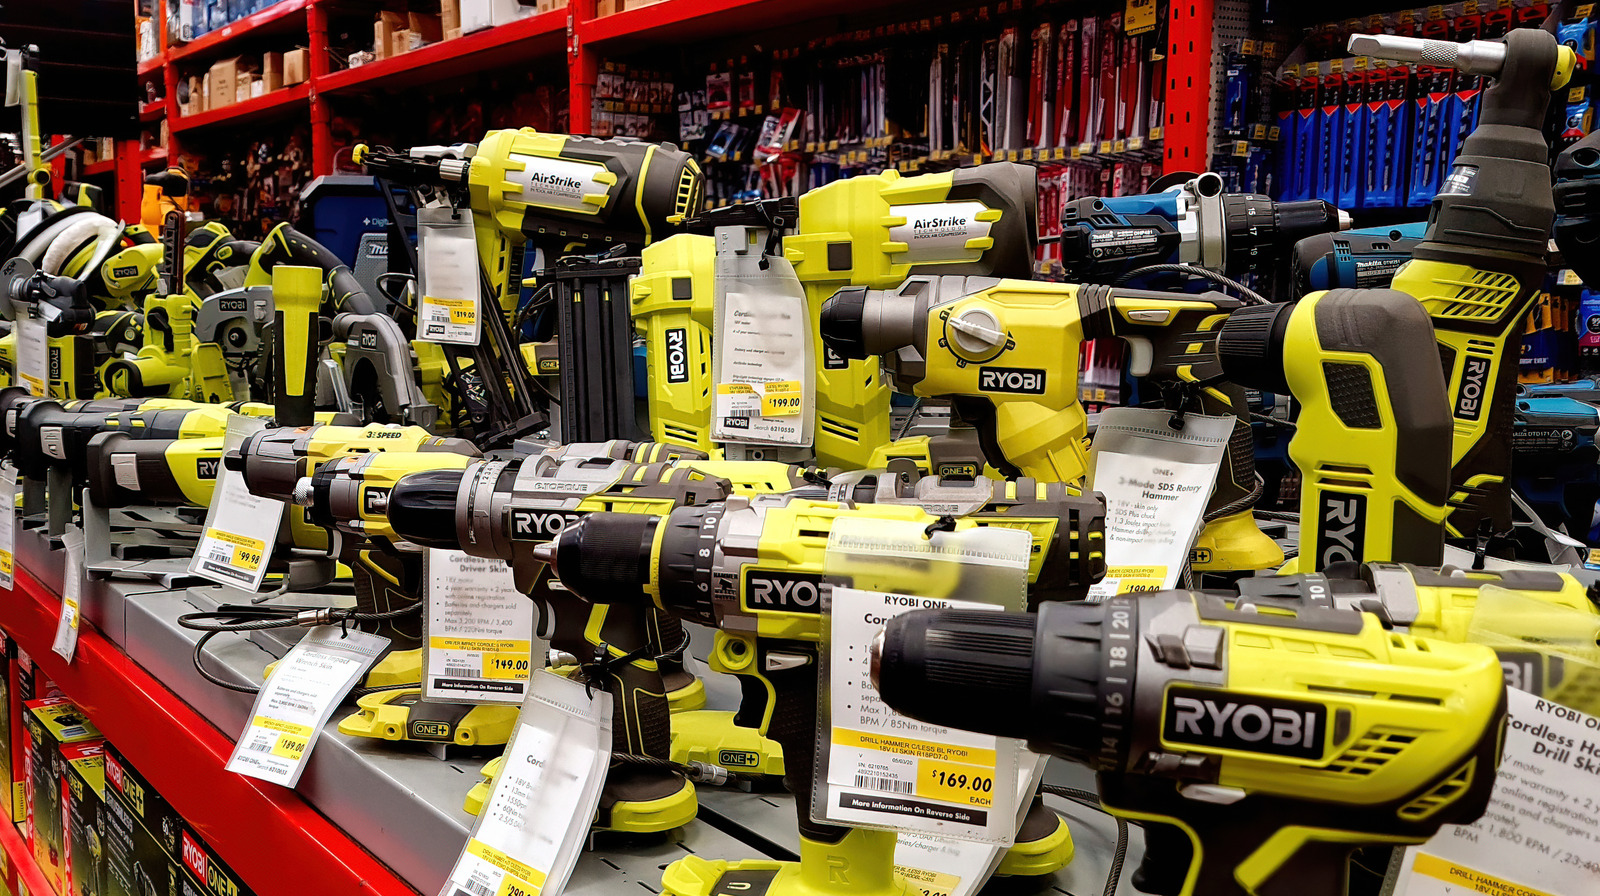 Are Ryobi And Milwaukee Made in the Same Factory